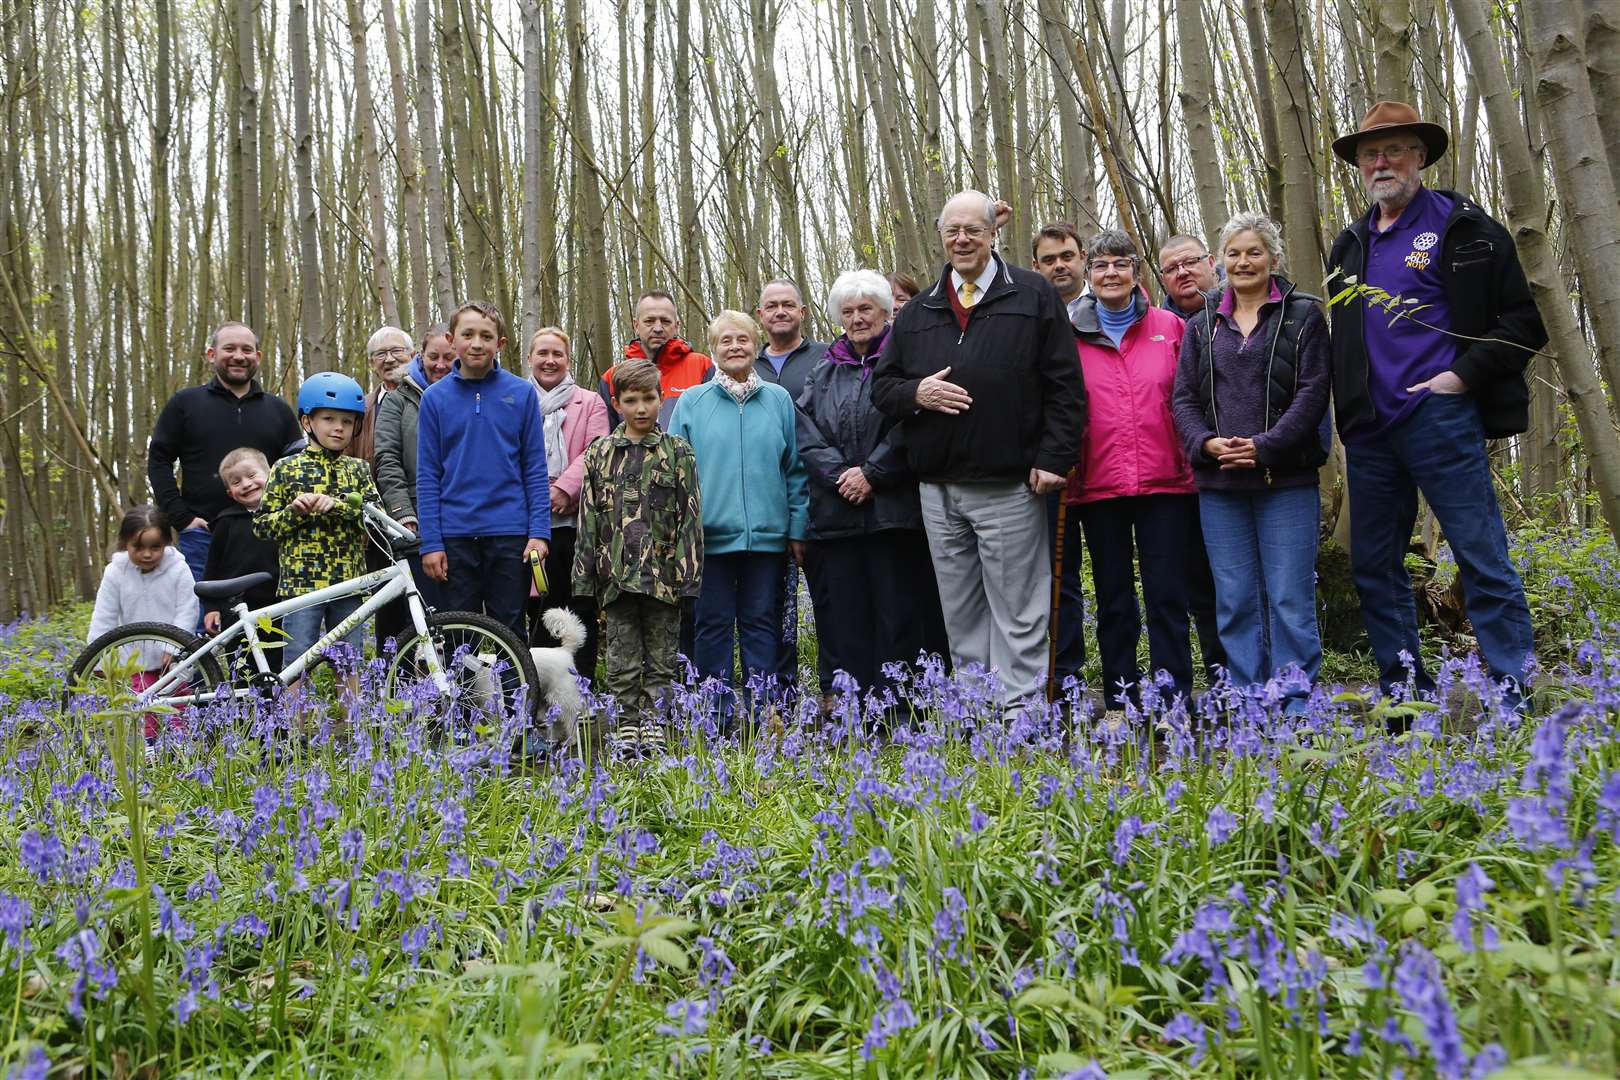 The decision has been welcomed by supporters of the woods